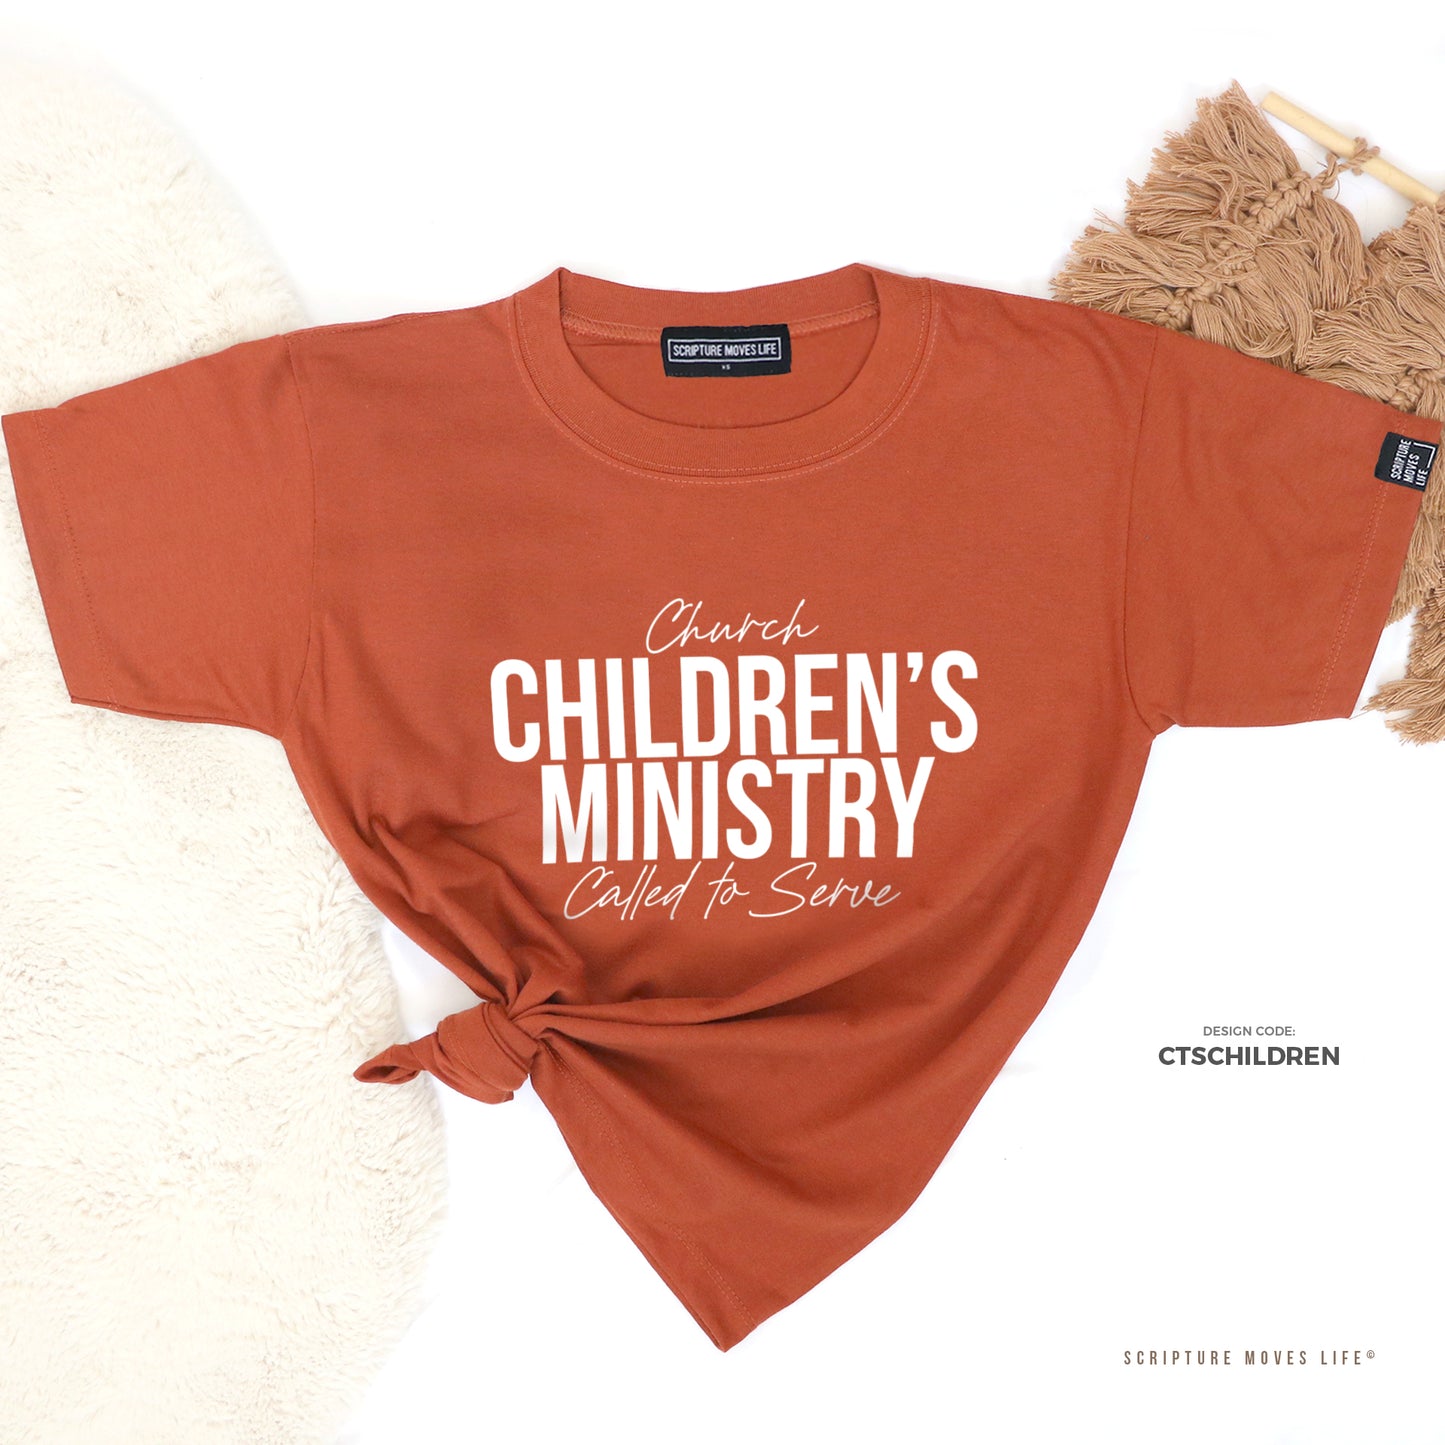 Classic-Called to Serve-Children's Ministry